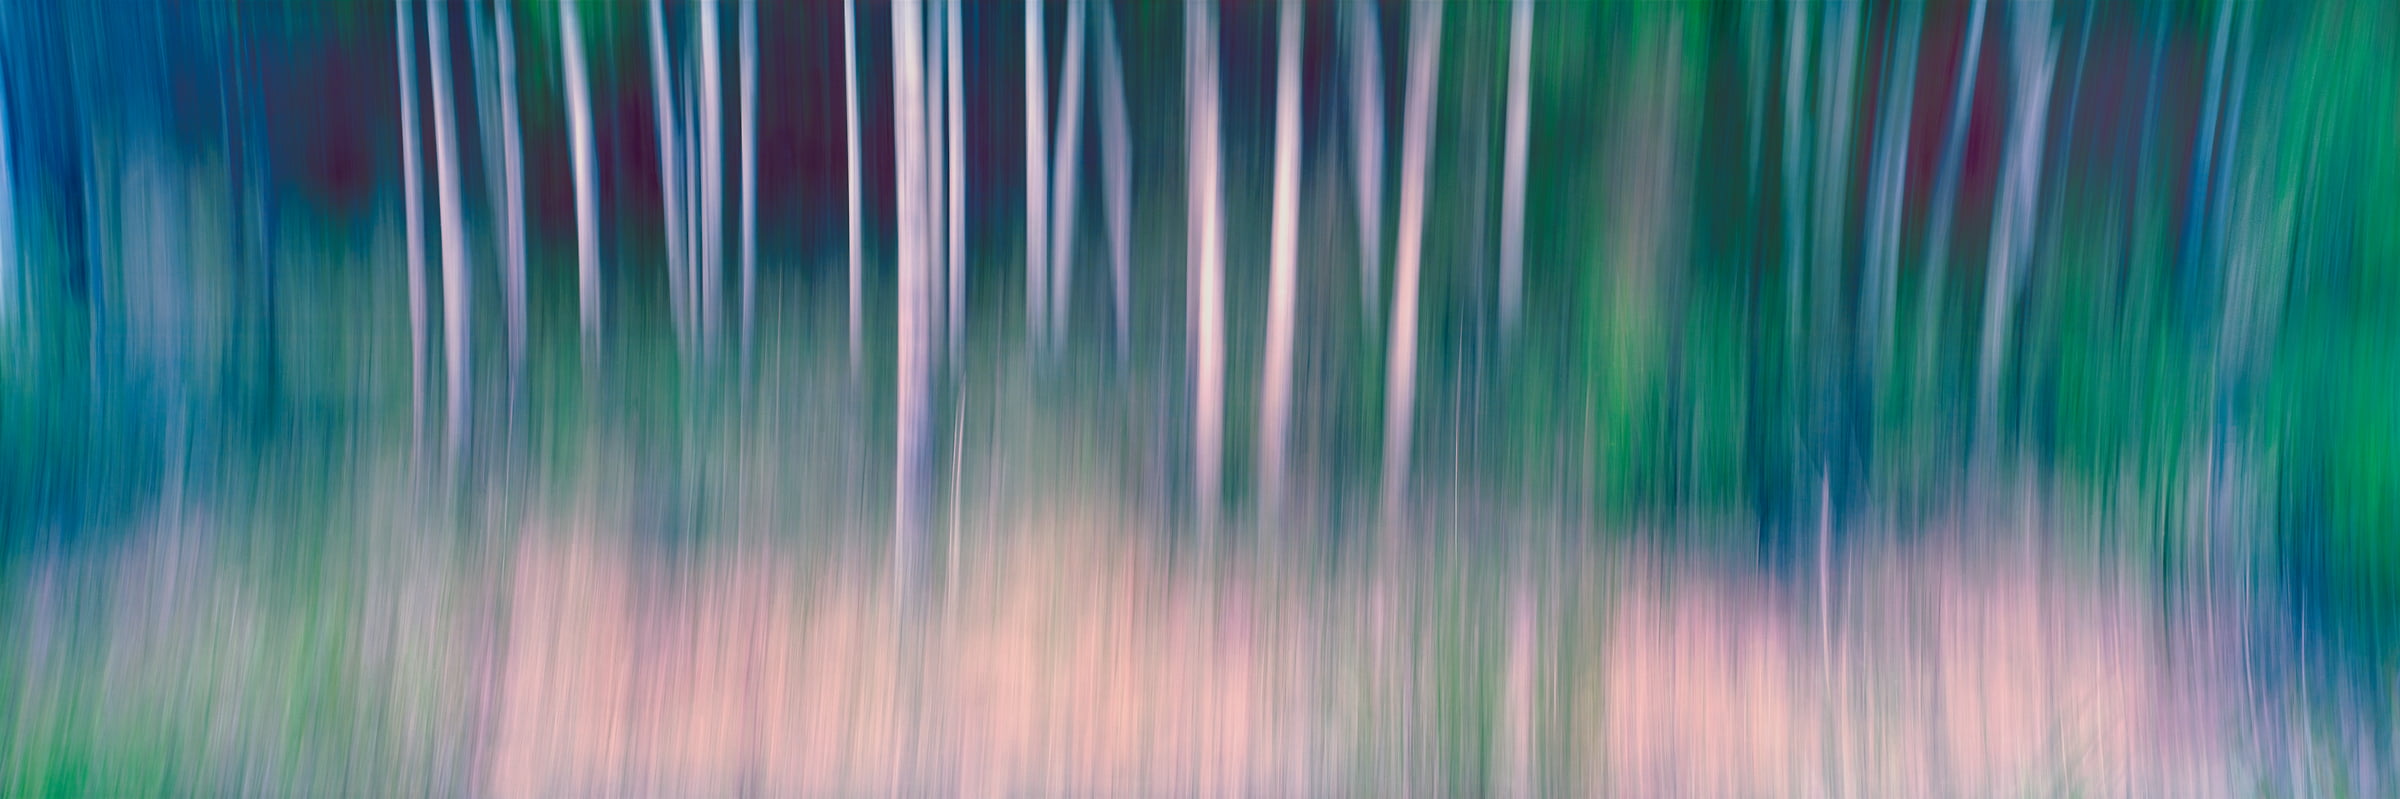 333 megapixels! A very high resolution, large-format, abstract photo of aspen trees; fine art photograph created by Scott Dimond in Kananaskis Country, Alberta, Canada.